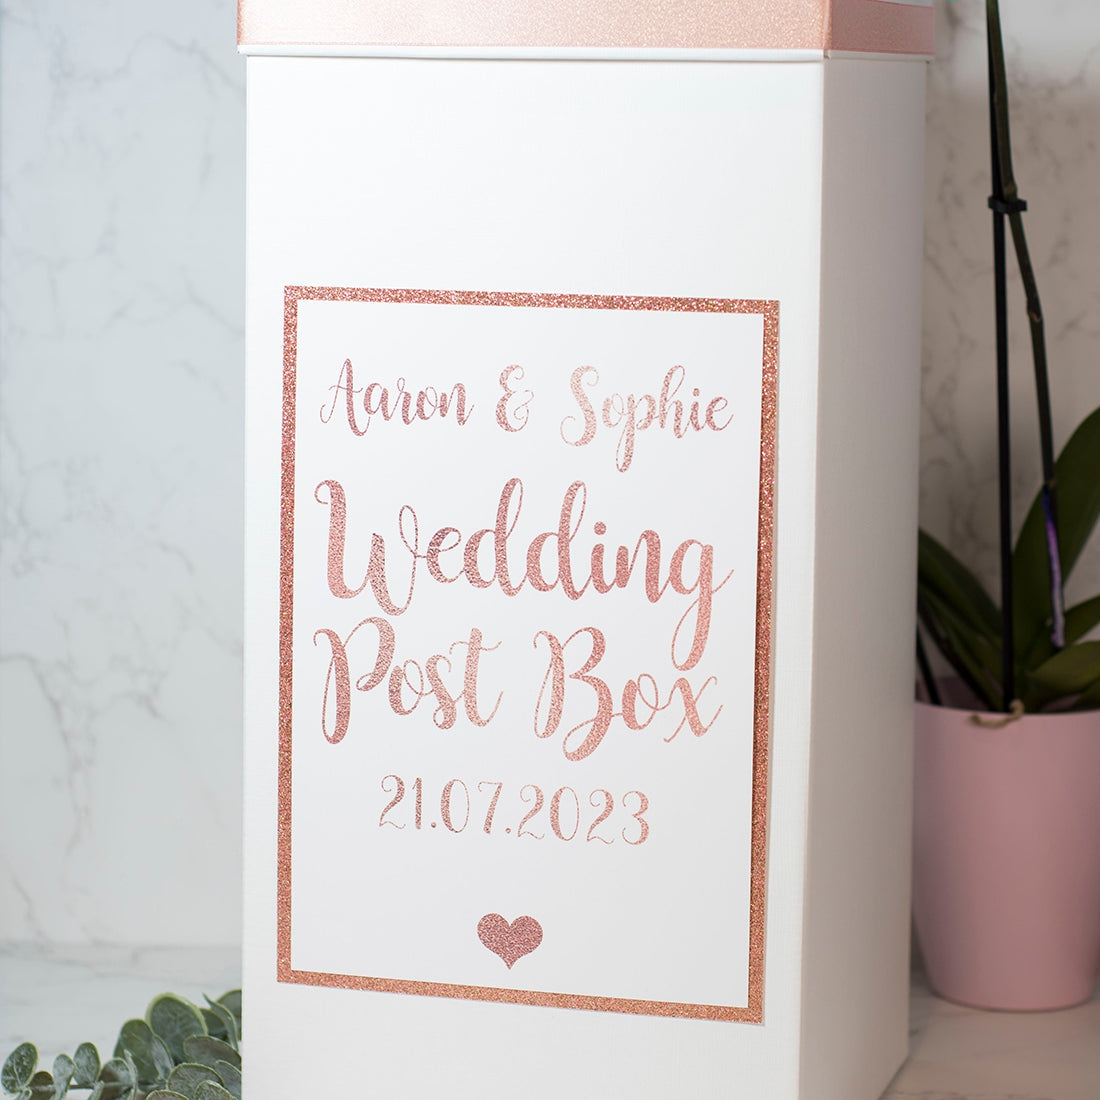 Post Boxes-Weddings by Lumi